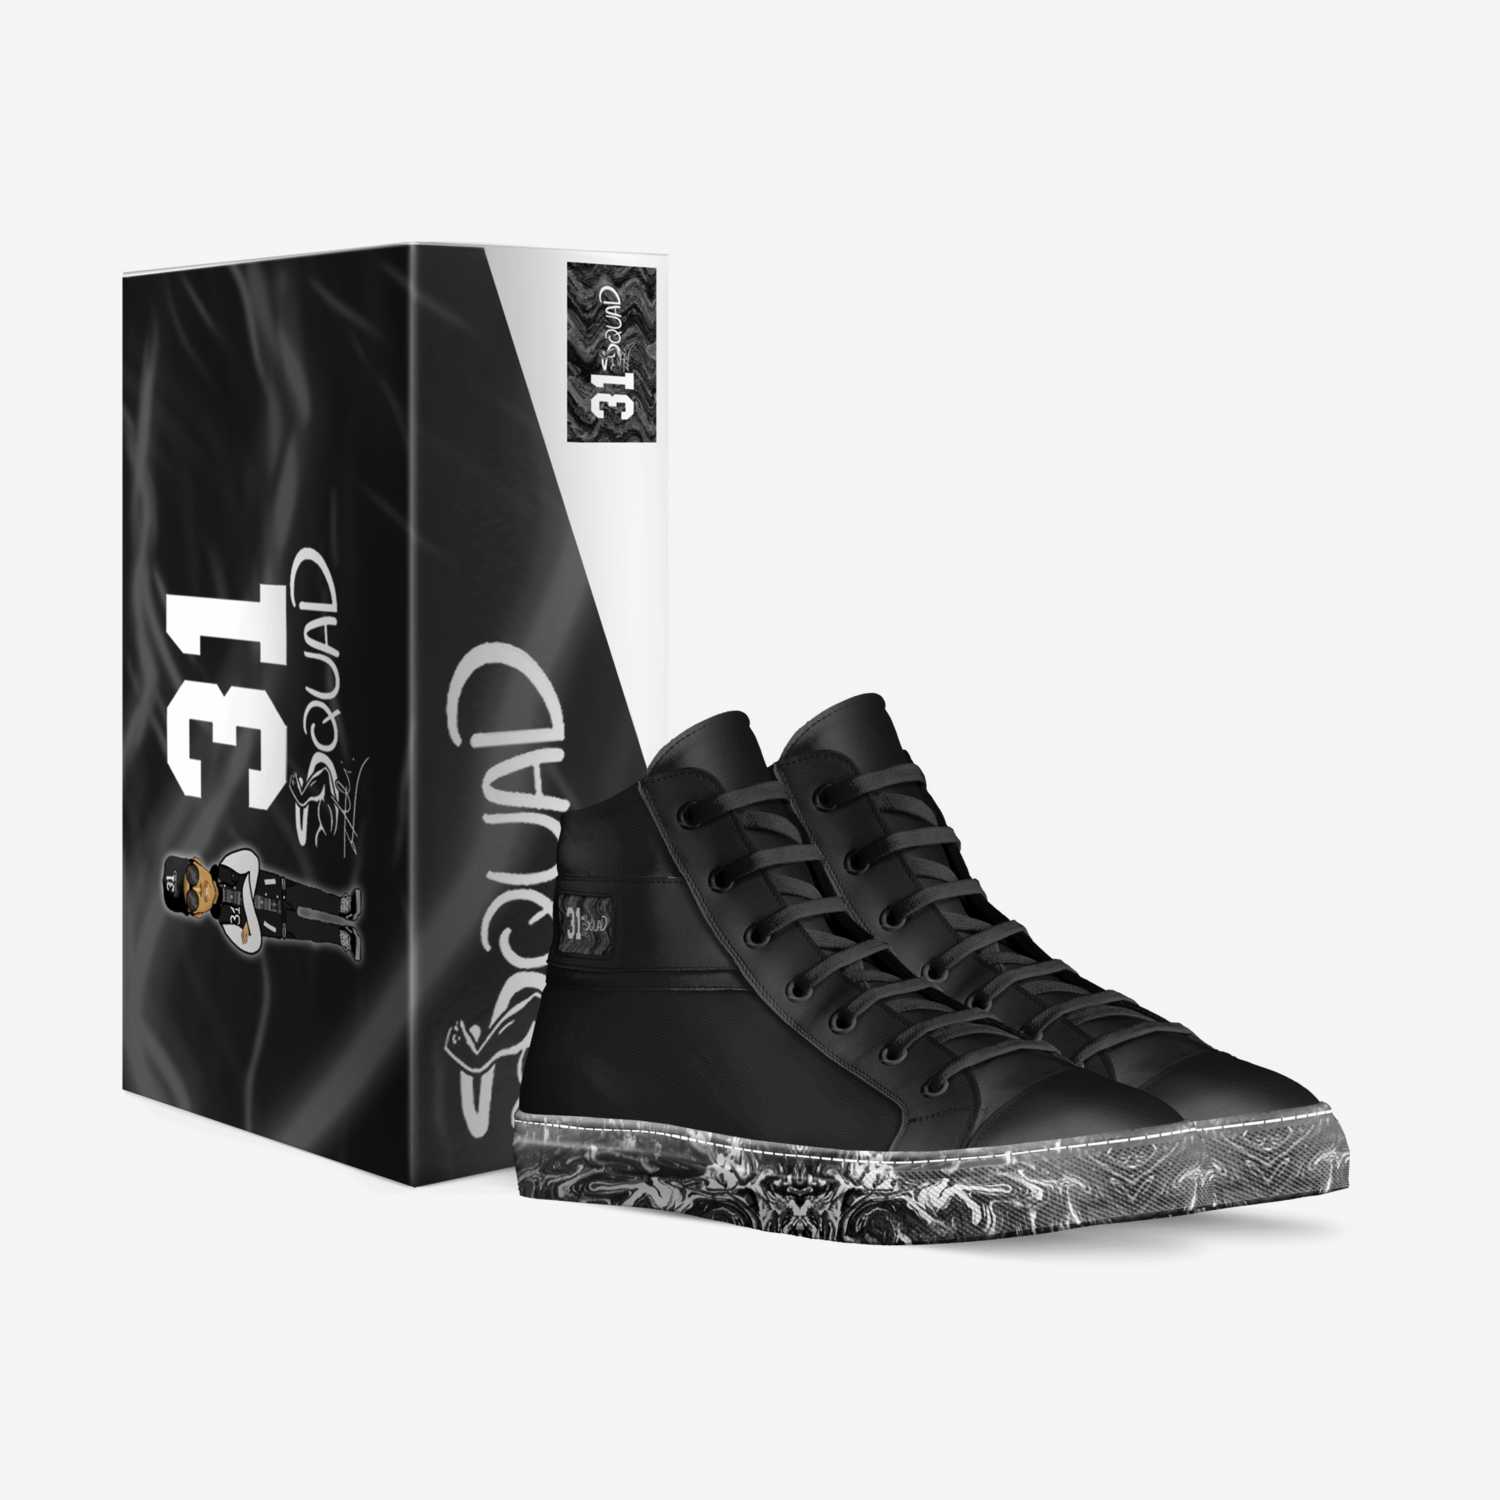 31 Squad Black Ice custom made in Italy shoes by Ali Tomineek | Box view